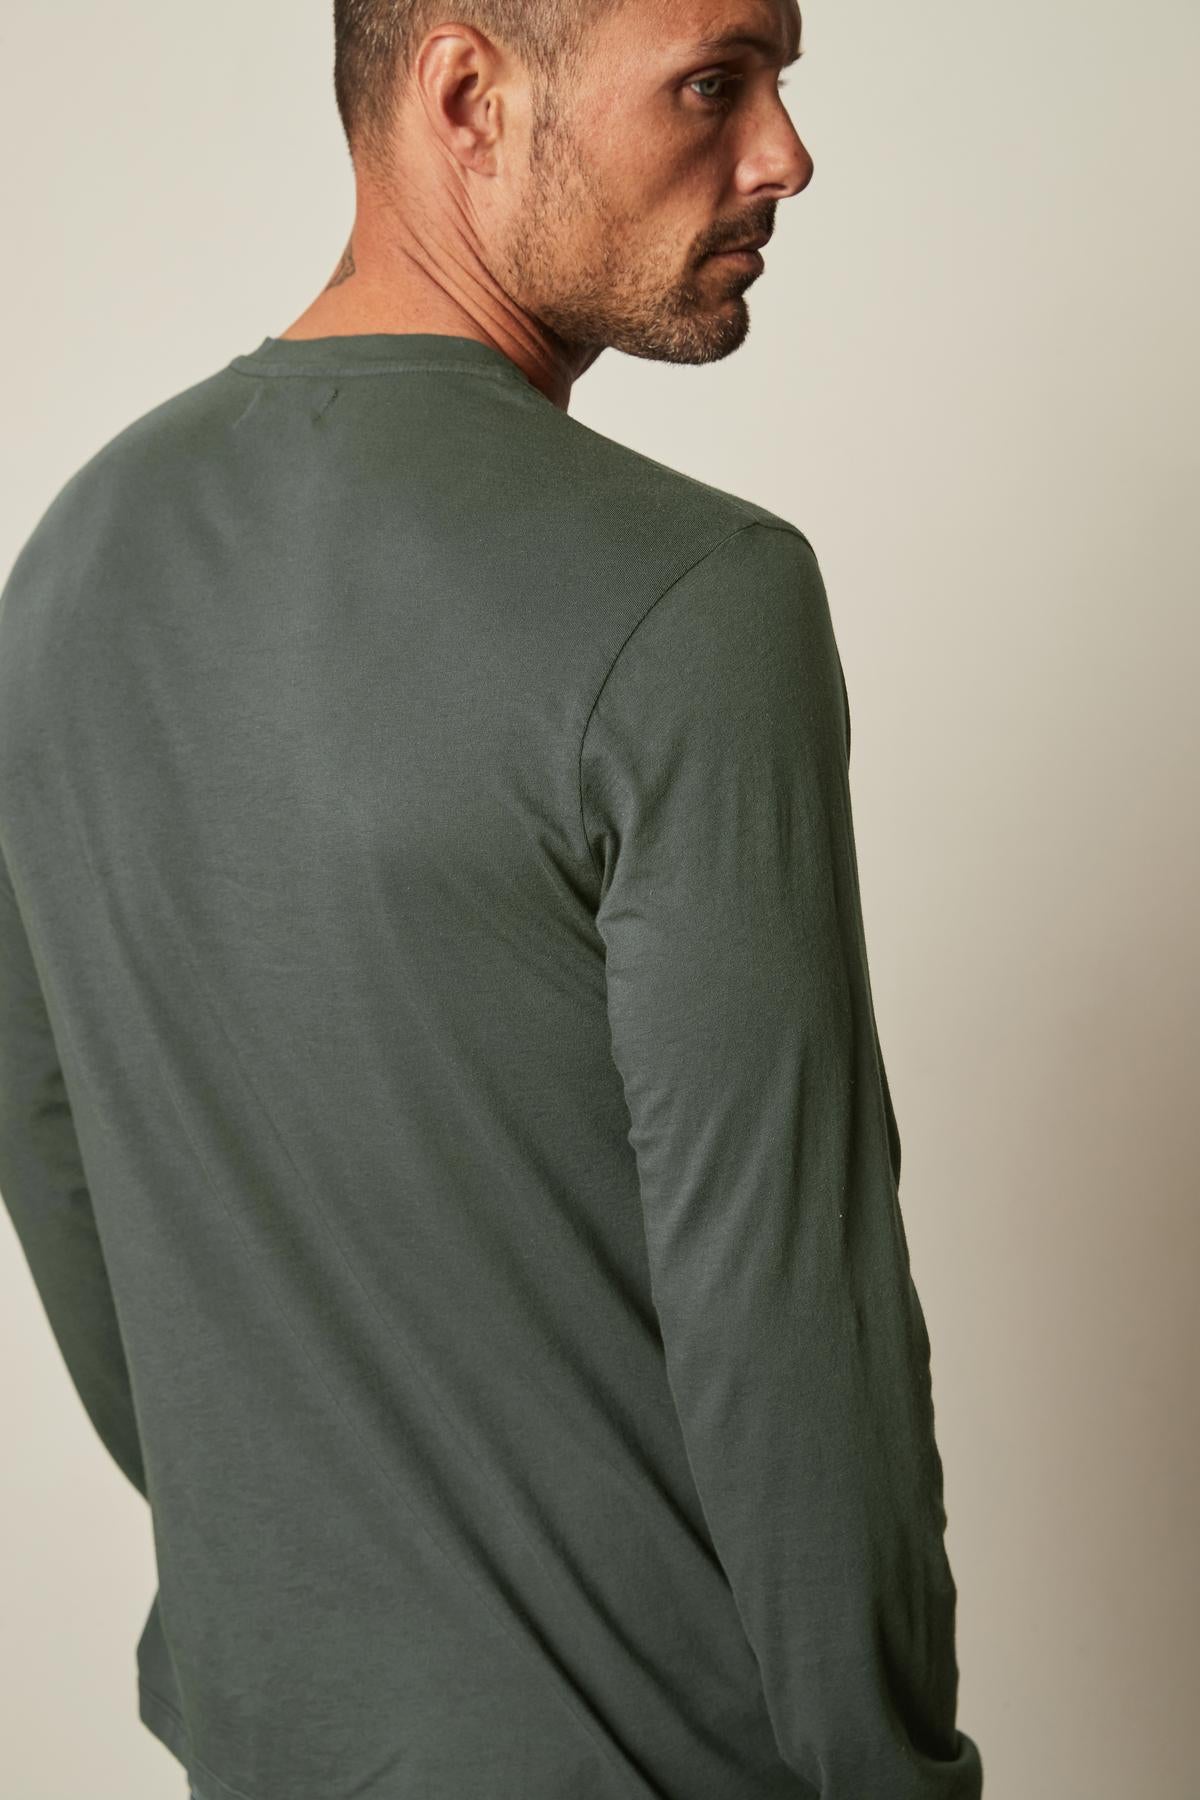   Skeeter Crew Neck Long Sleeve Tee in olive back close up 